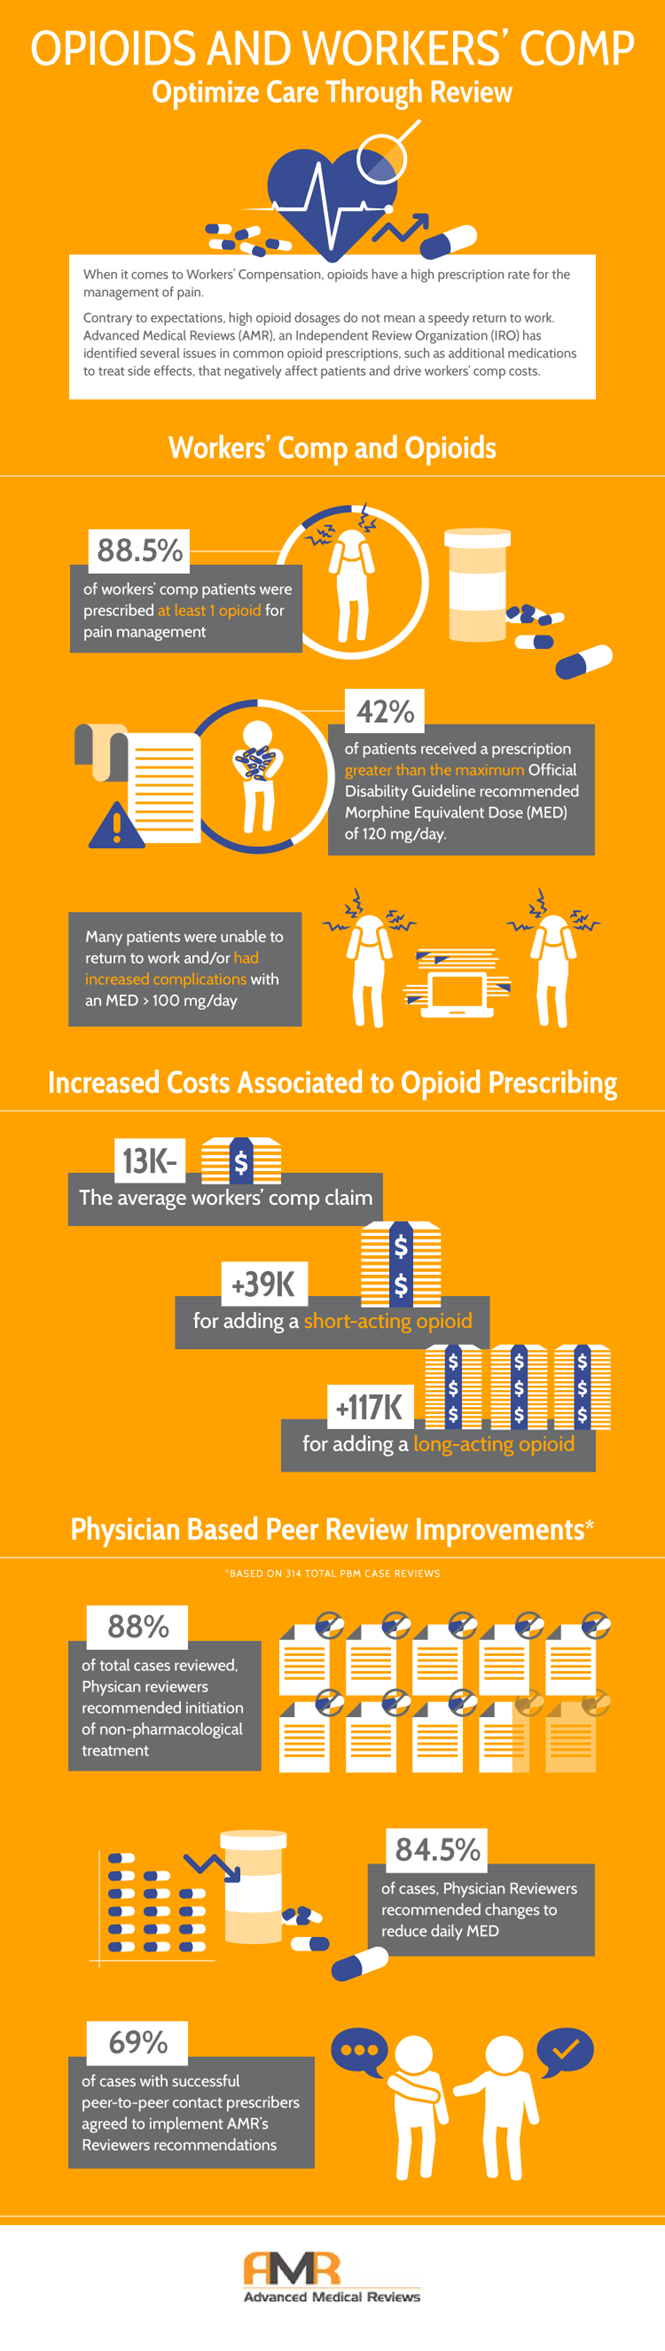 Infographic on opioids and workers' compensation.